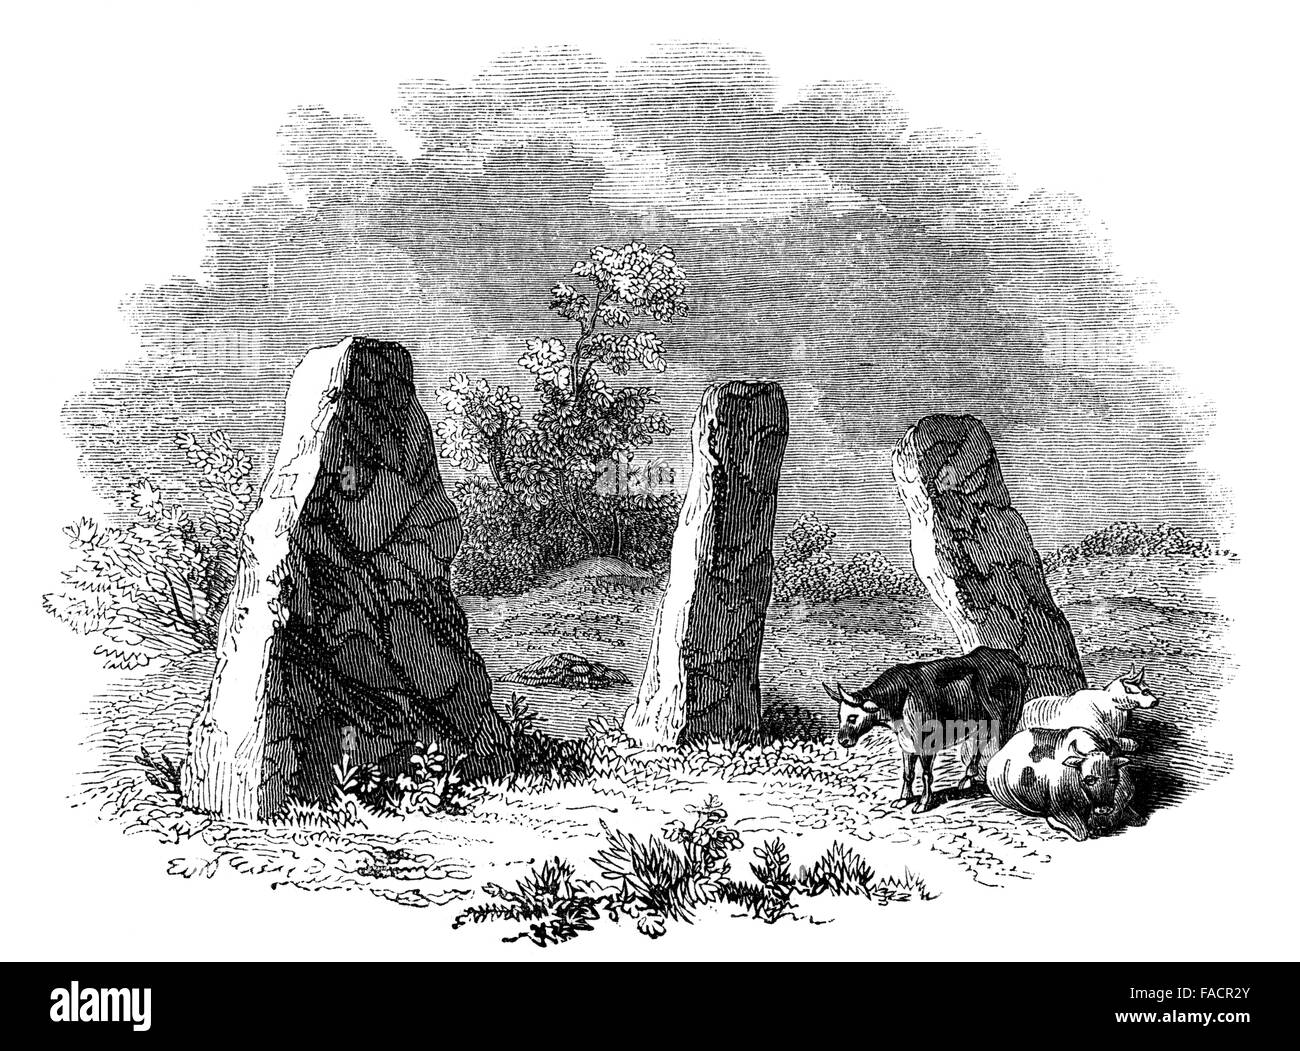 engraved illustration of three Bronze Age standing stones, known as Harold’s Stones,Trellech, South Wales, UK from 1844 Stock Photo